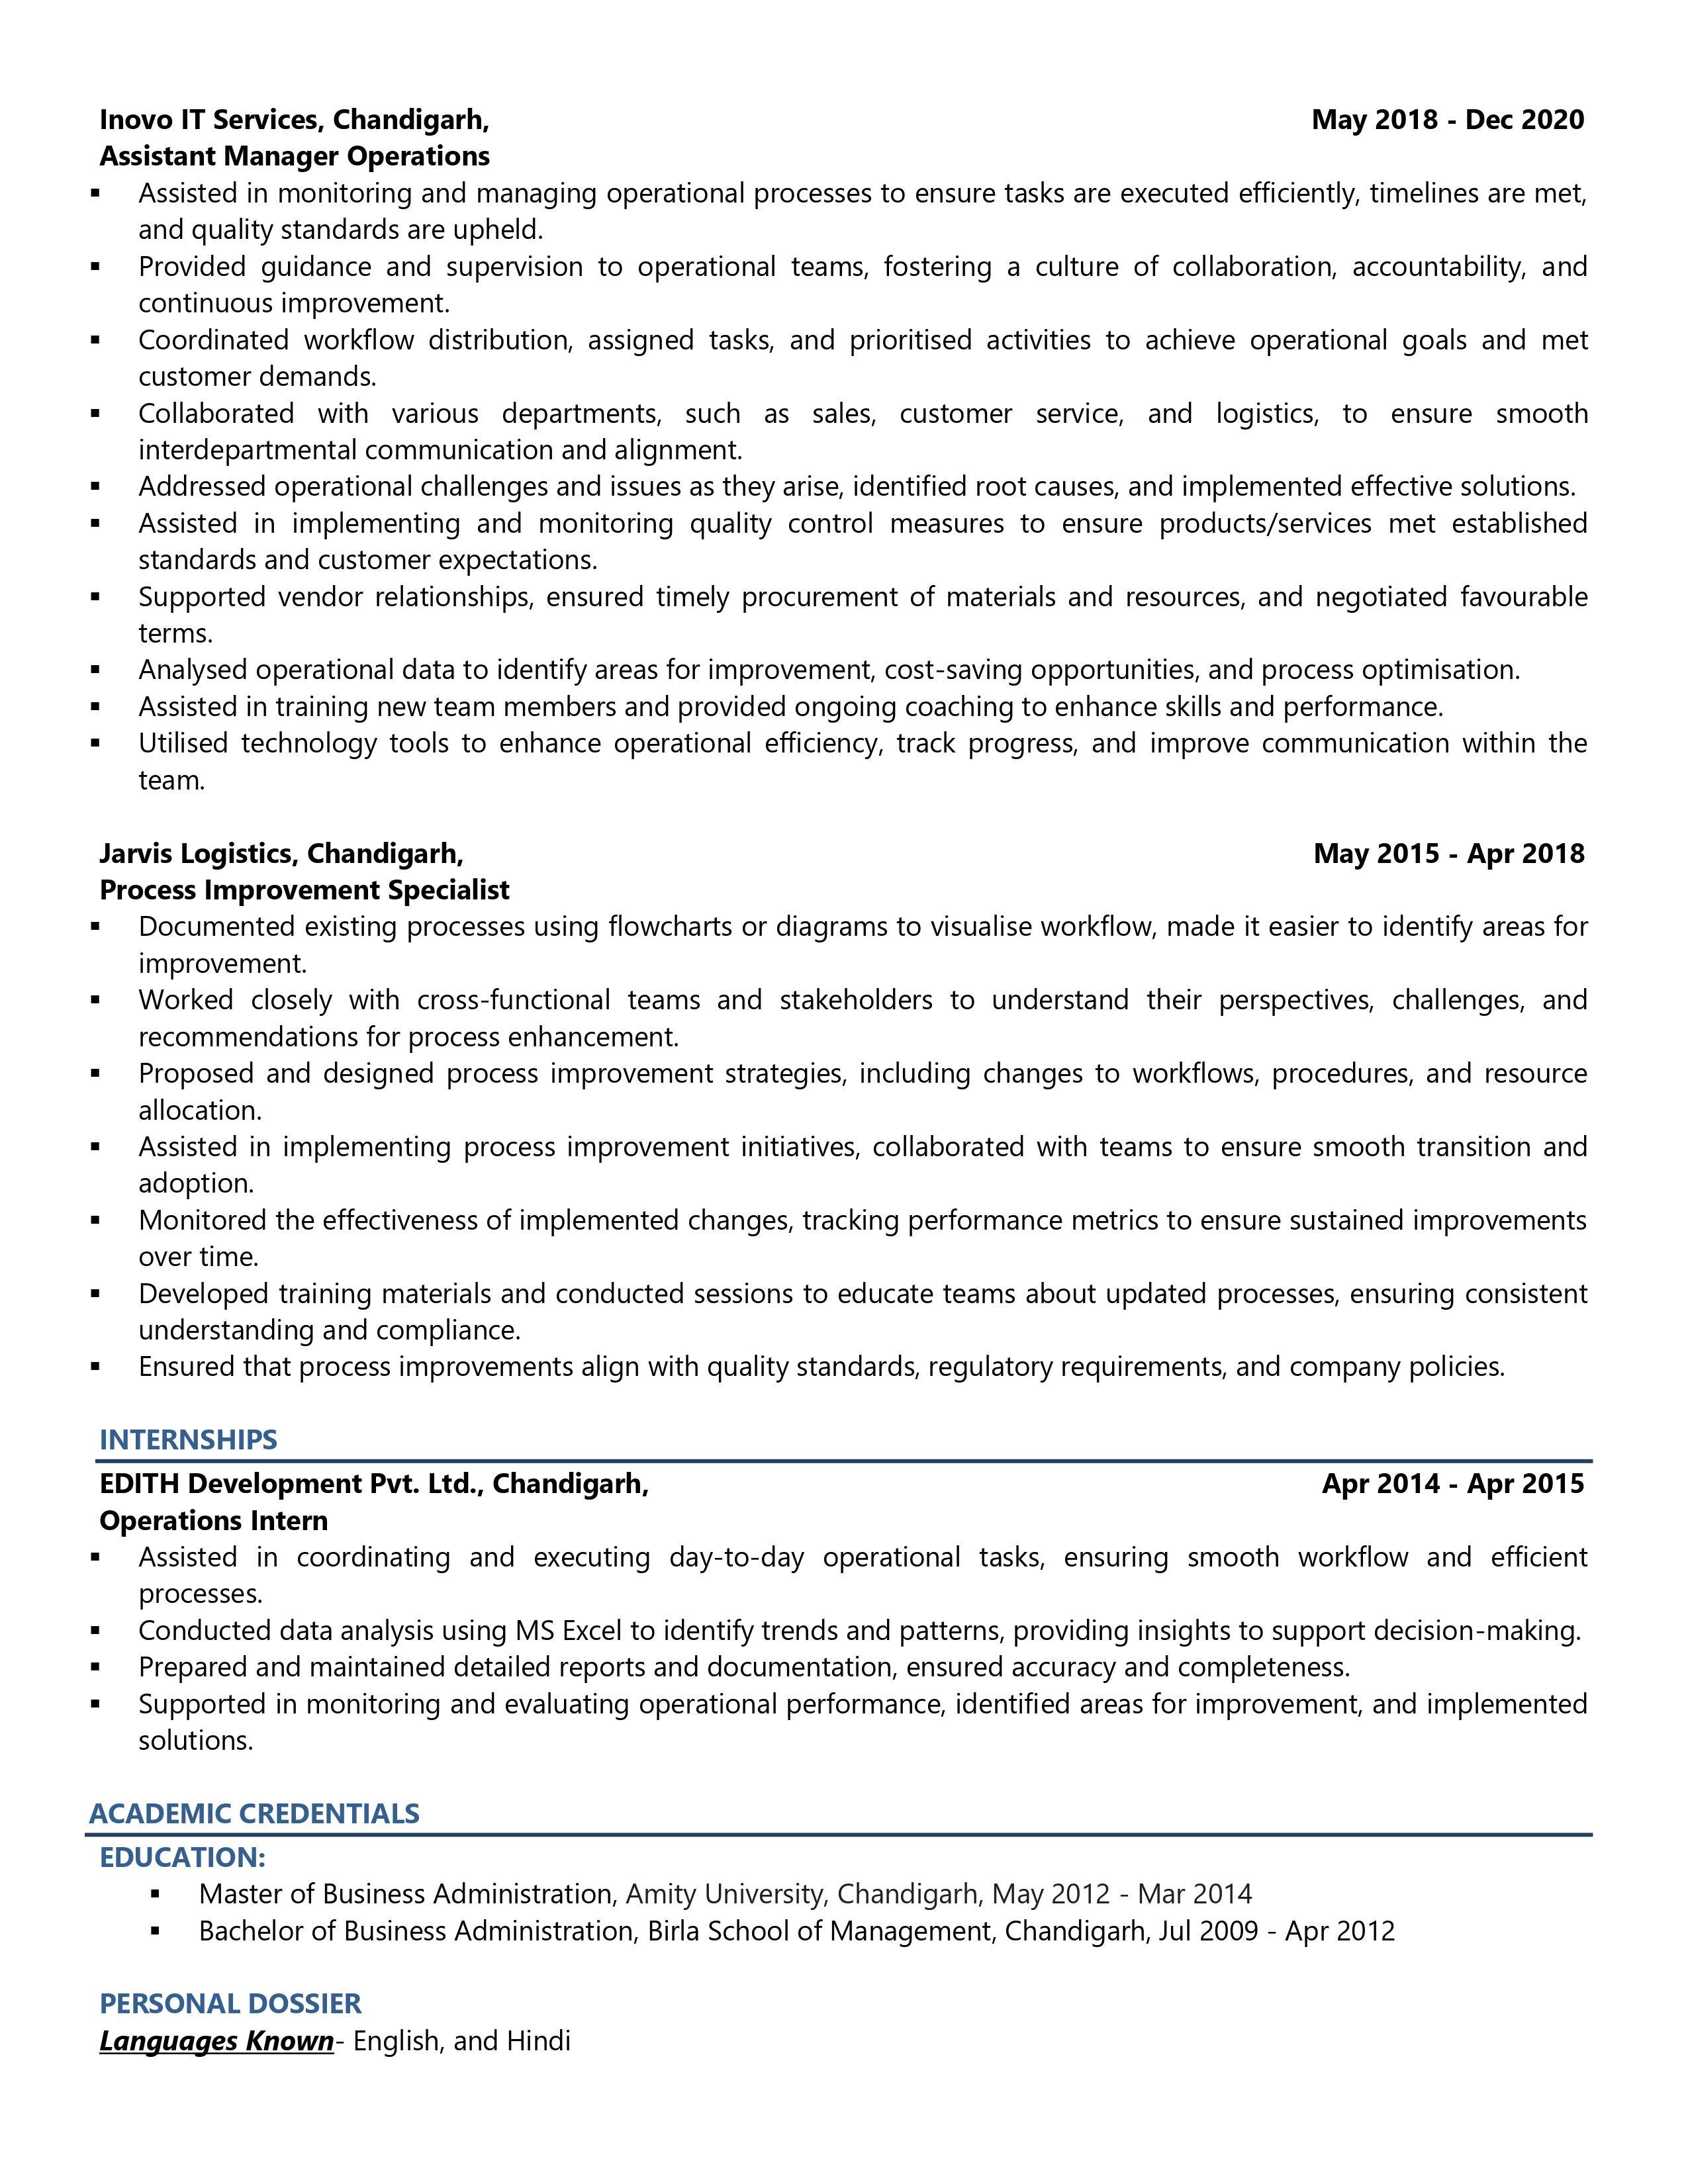 Operations Manager - Resume Example & Template